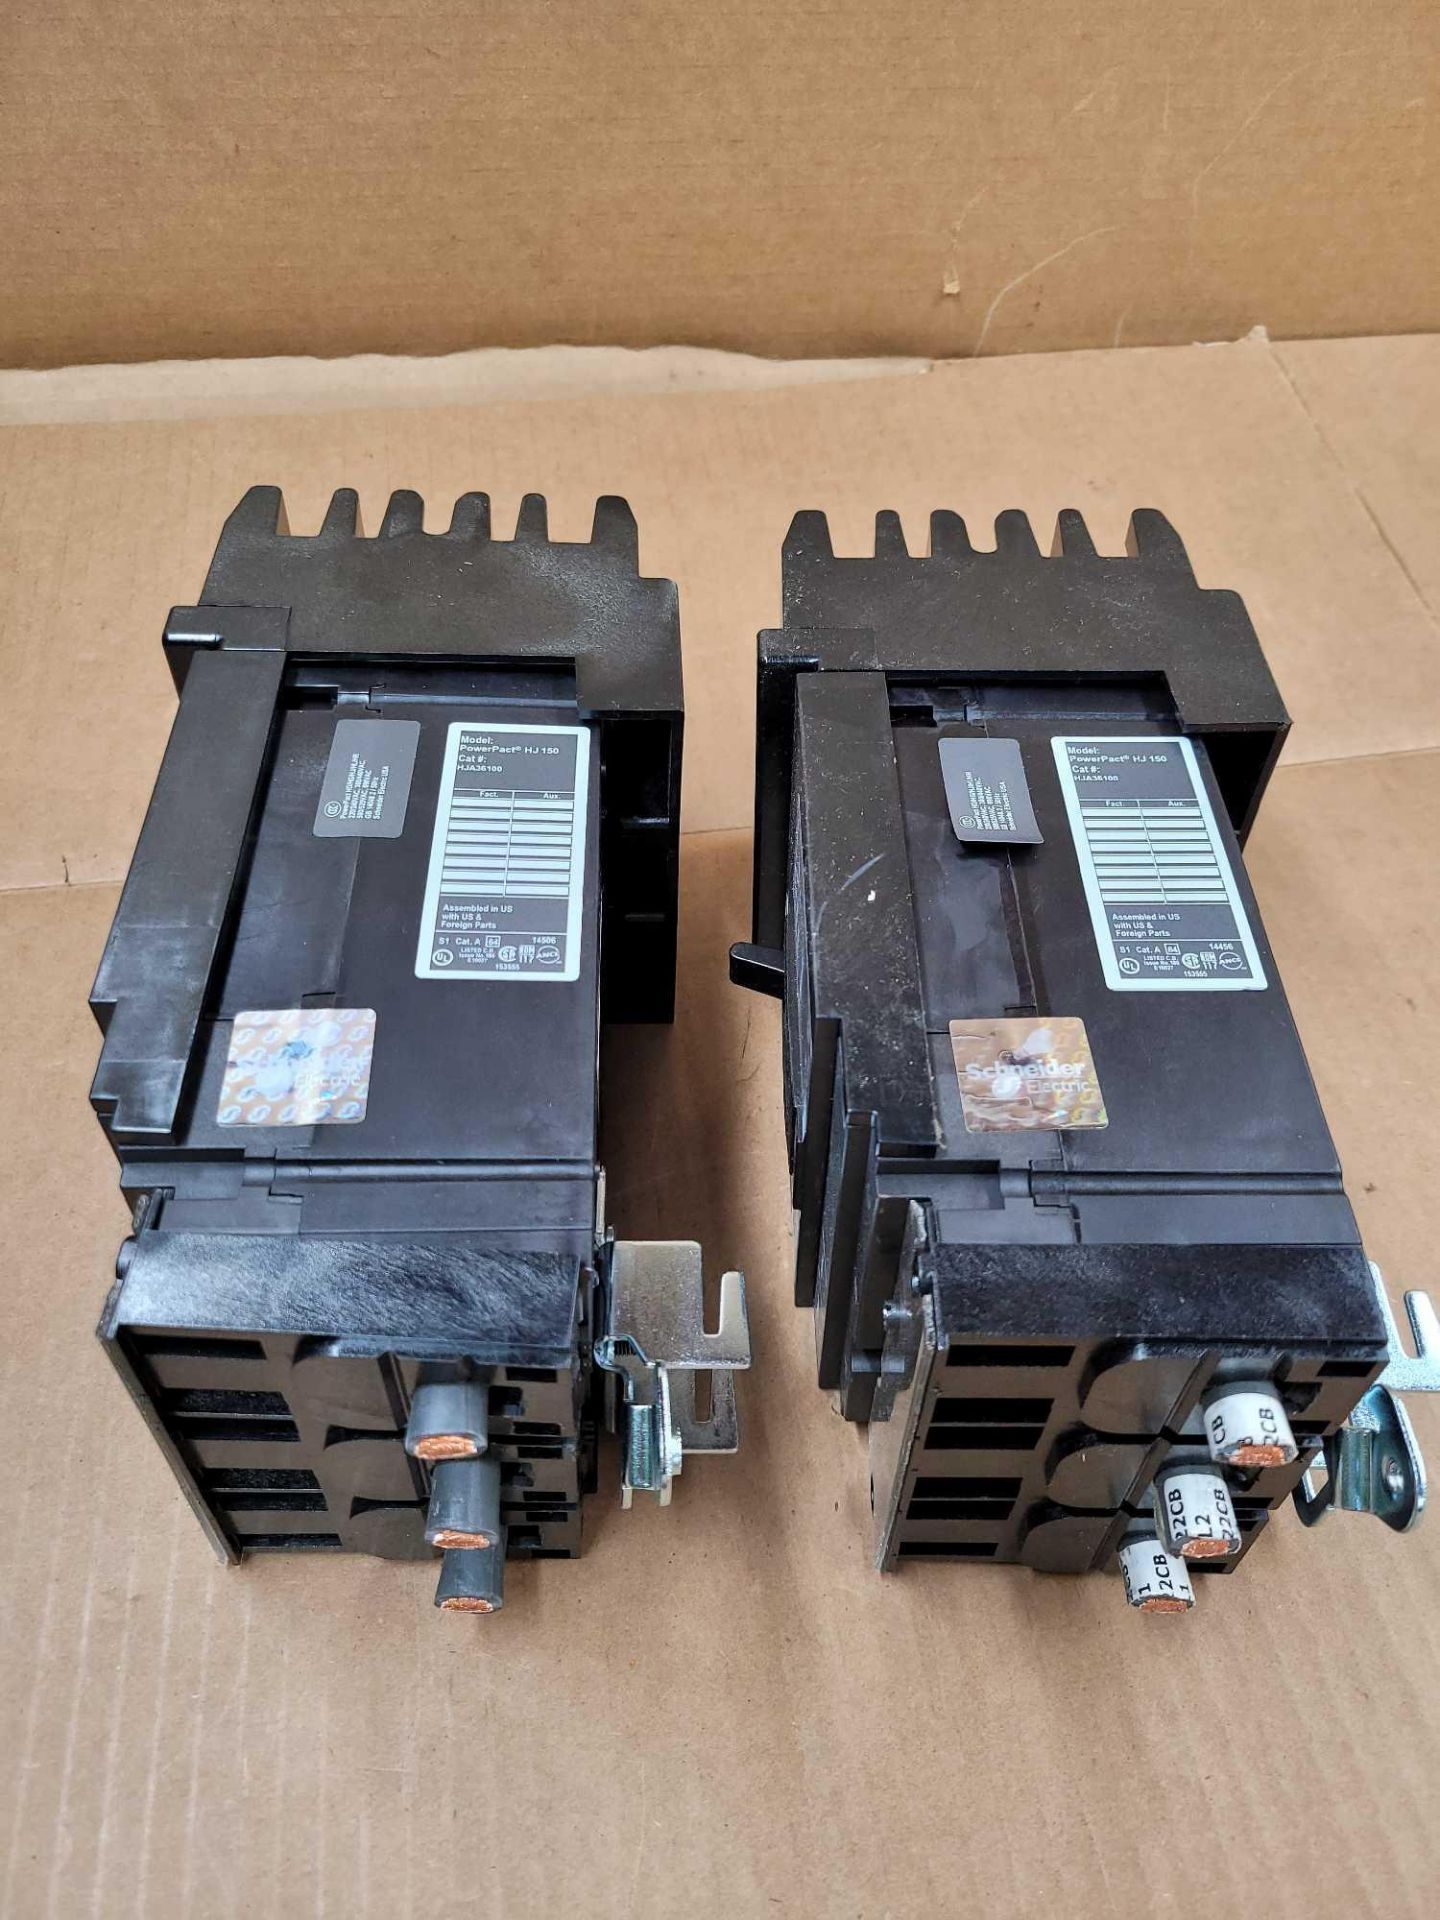 LOT OF 2 SQUARE D HJA36100 / 100 Amp Molded Case Circuit Breaker  /  Lot Weight: 9.4 lbs - Image 3 of 6